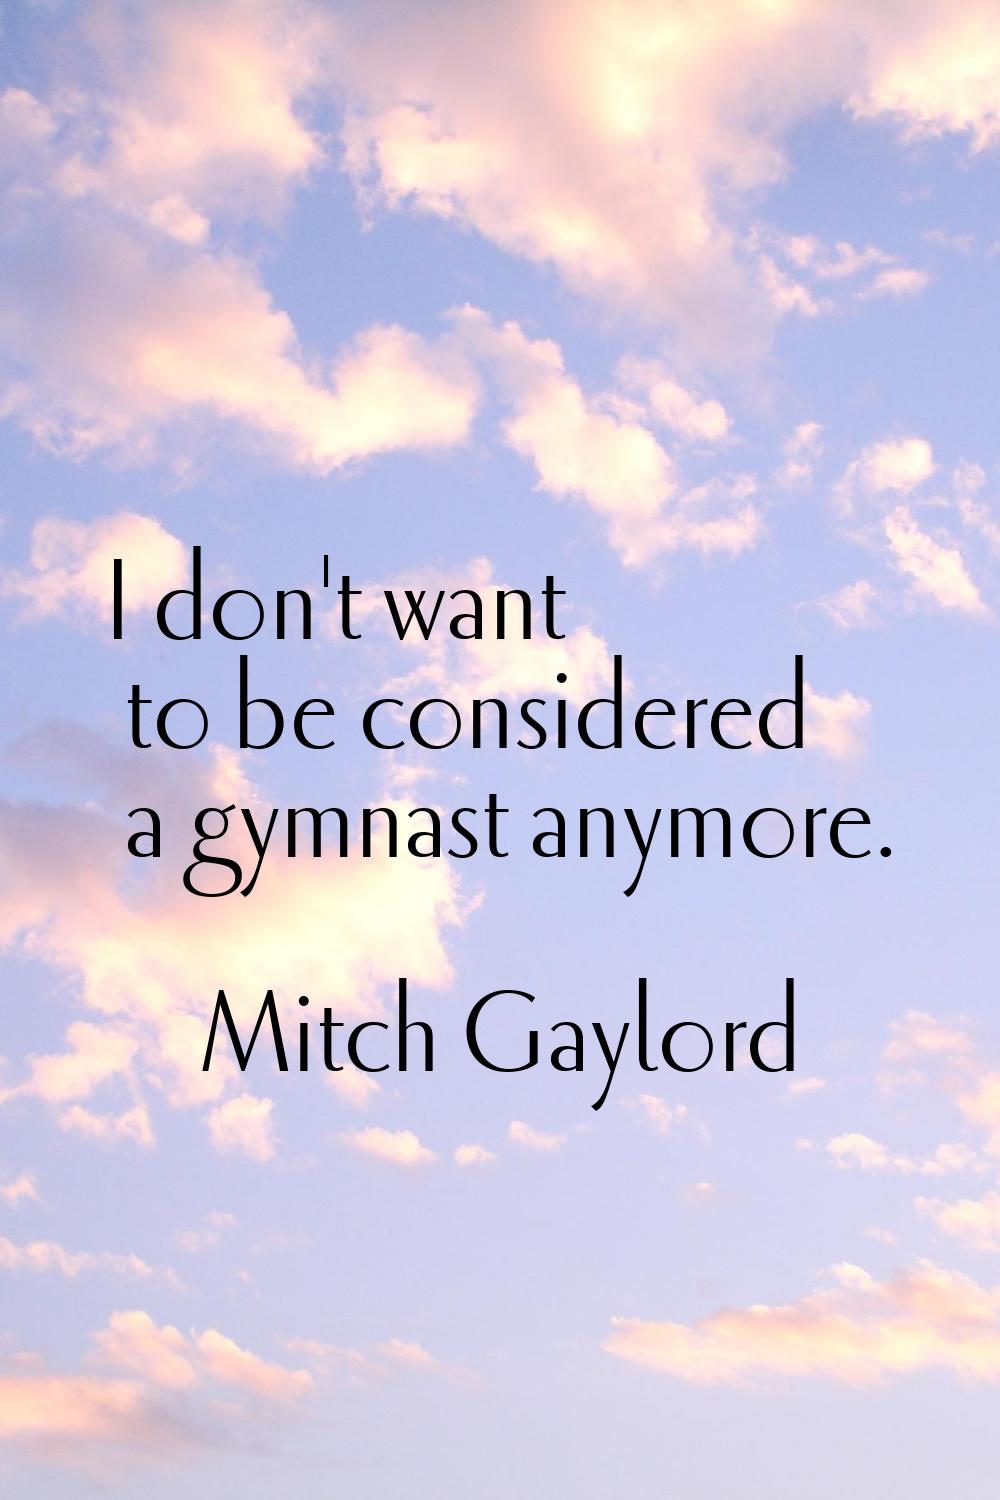 I don't want to be considered a gymnast anymore.